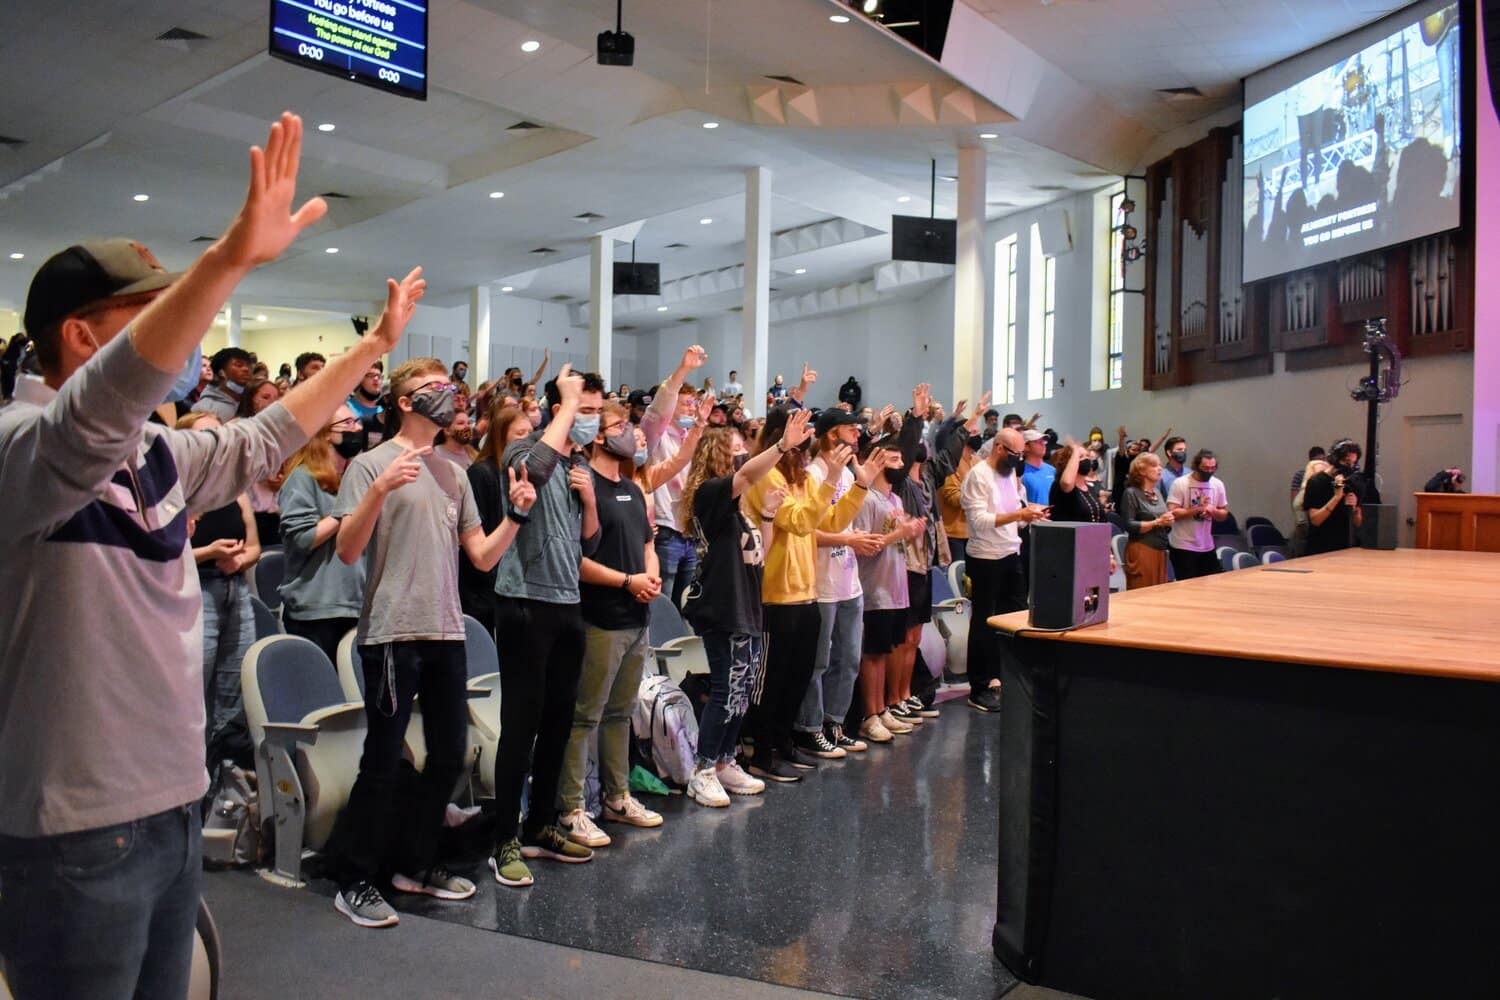 North Greenville students during chapel worship.